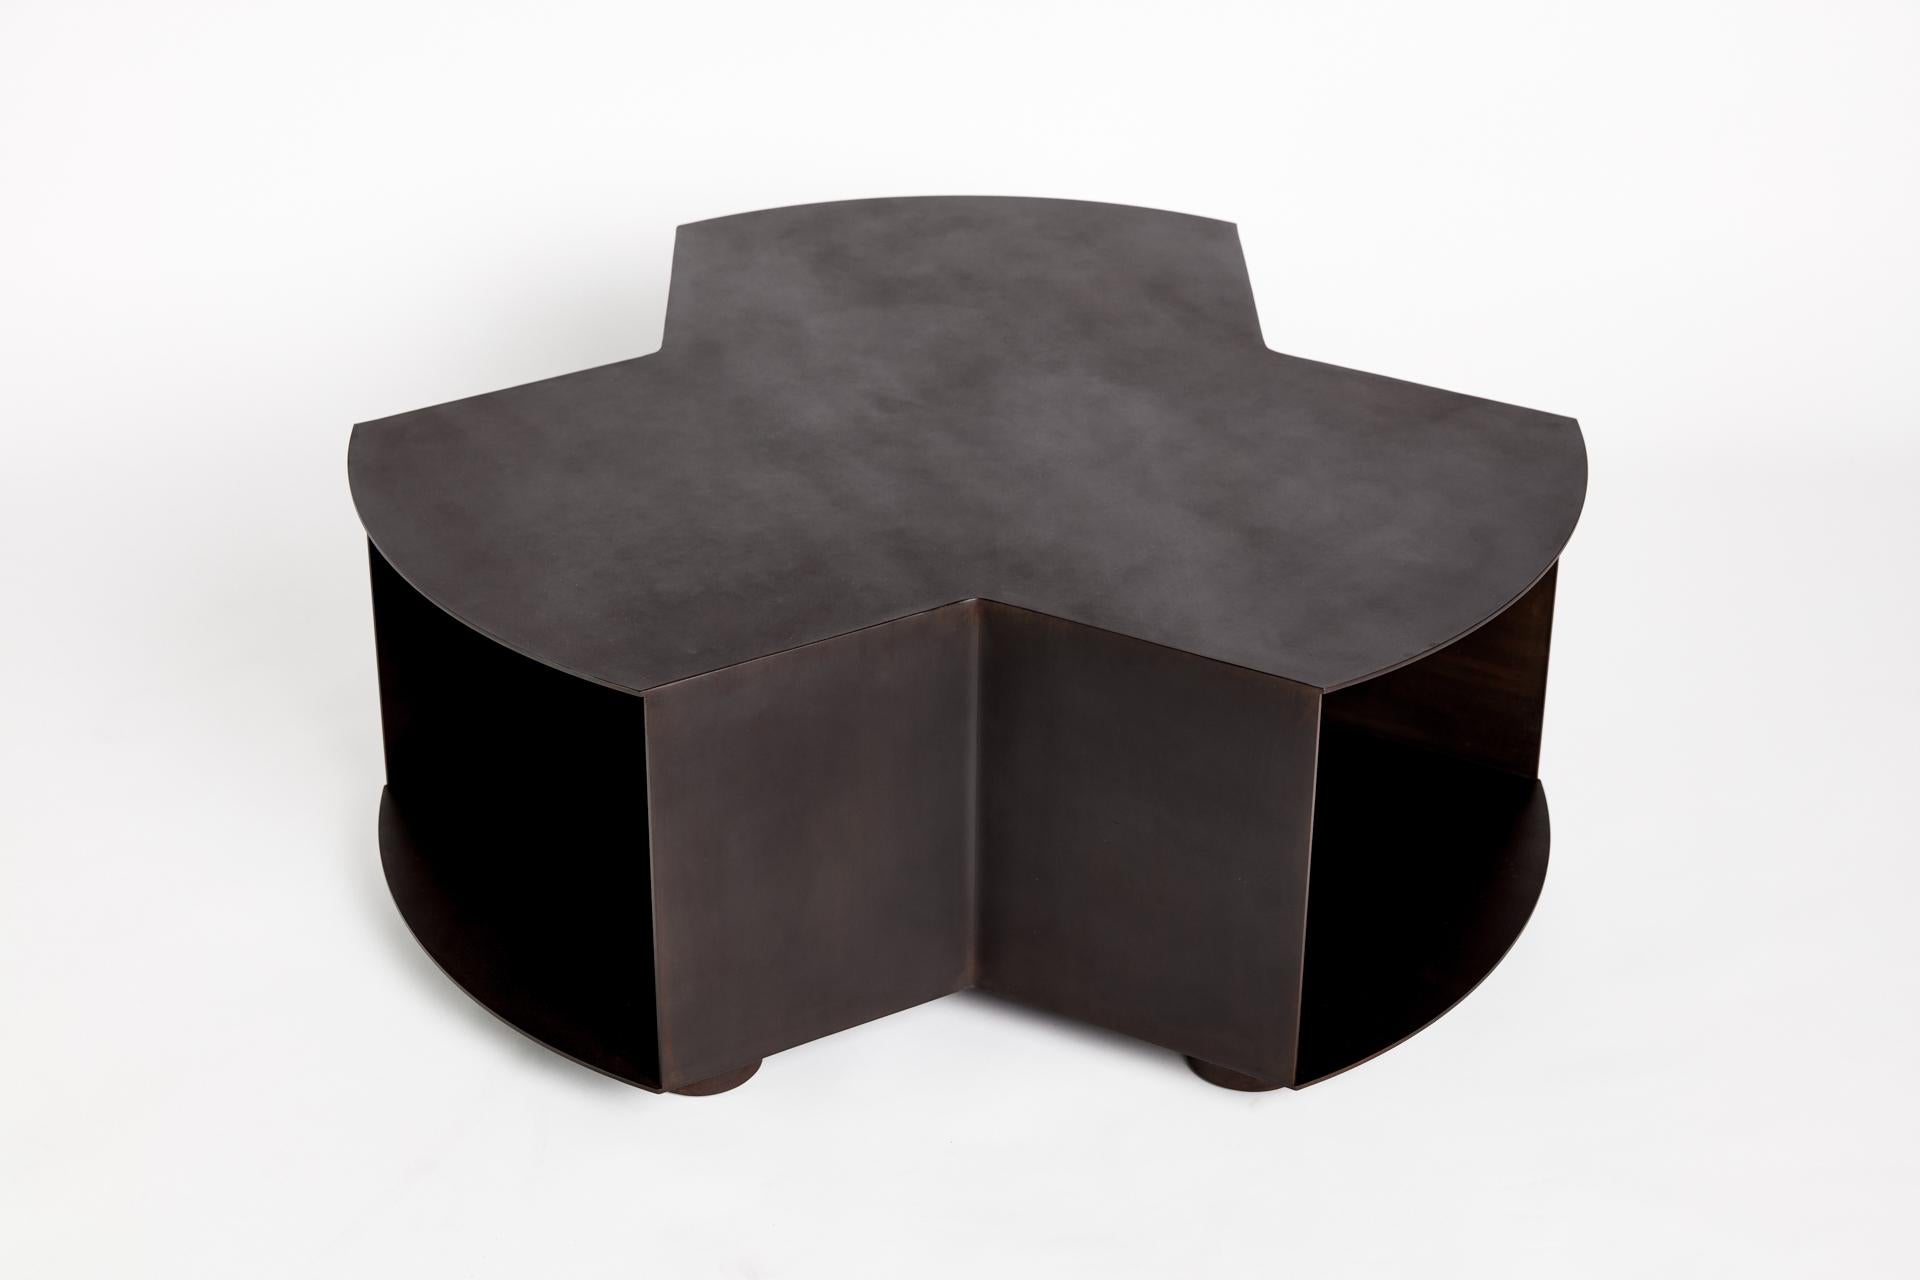 Artemis table by Ben Barber Studio
Dimensions: 101.6 x 94 x 40.64 cm
Materials: Aged steel, wax
Finishes: Aged steel, matte wax

An exploration into architecture at the scale of furniture. The steel structure is given a hand applied patina with